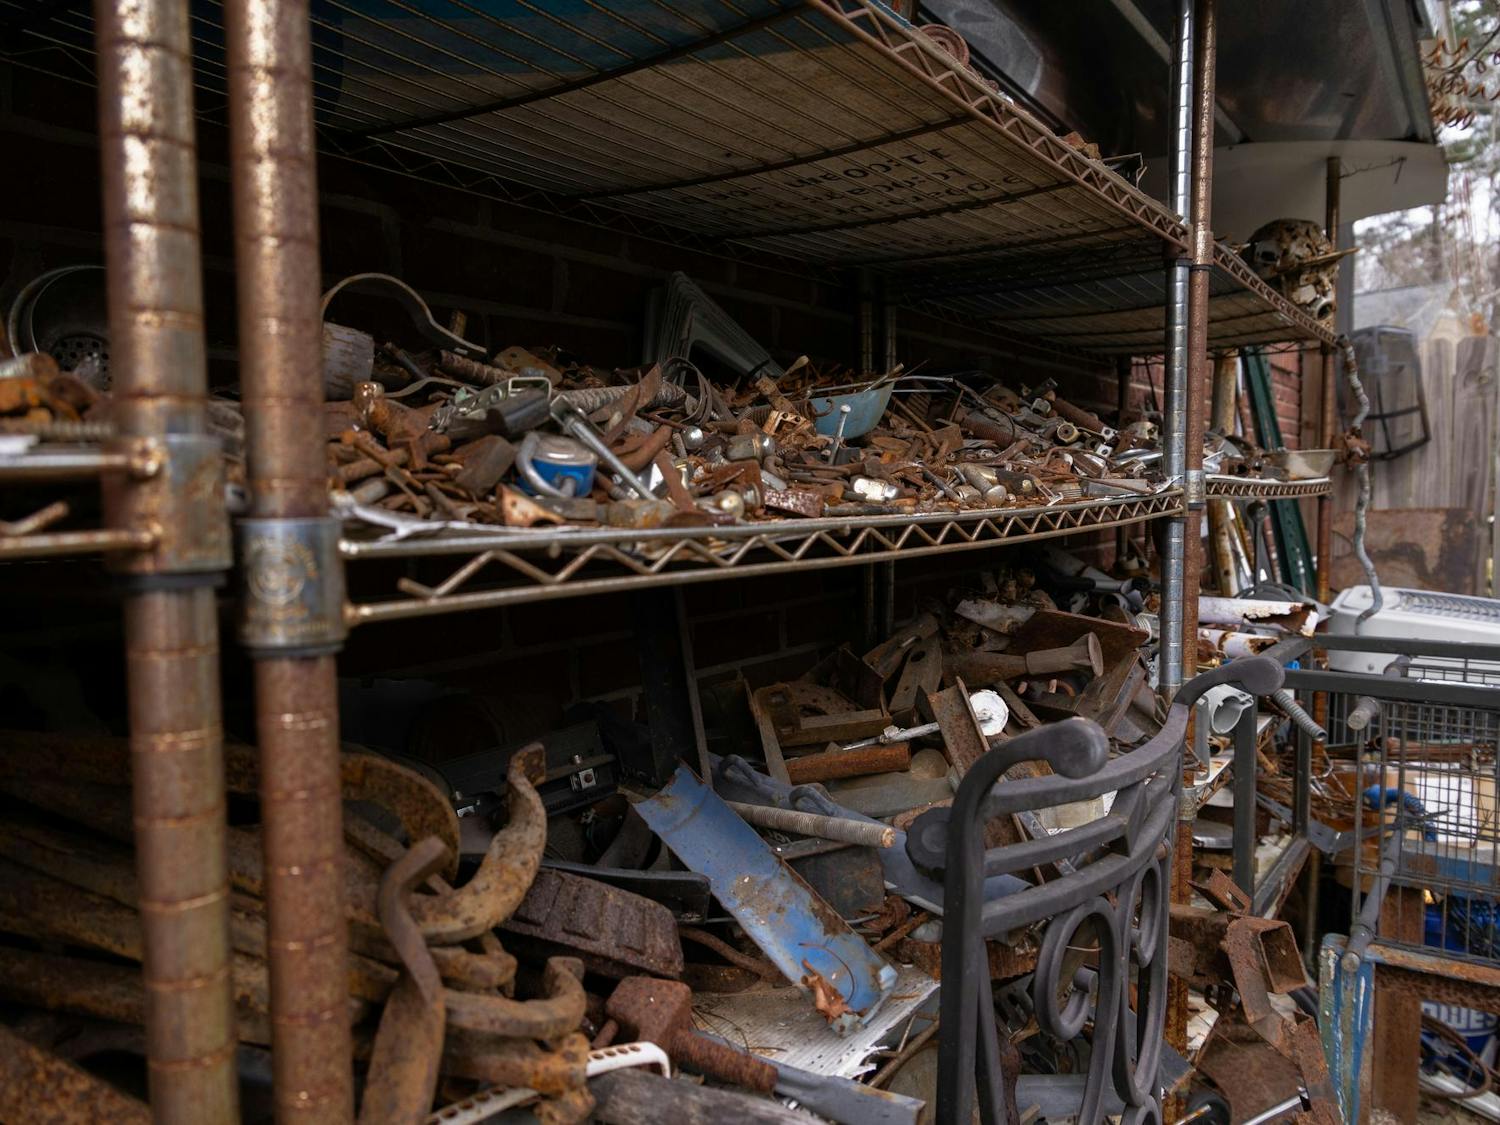 Shelves at Humphries' workshop in West Columbia are lined with discarded items that he repurposes to help form his art. When creating sculptures, Humphries moves piles of supplies to the floor where he is building and only goes back to the shelves when he runs out of material on the floor.